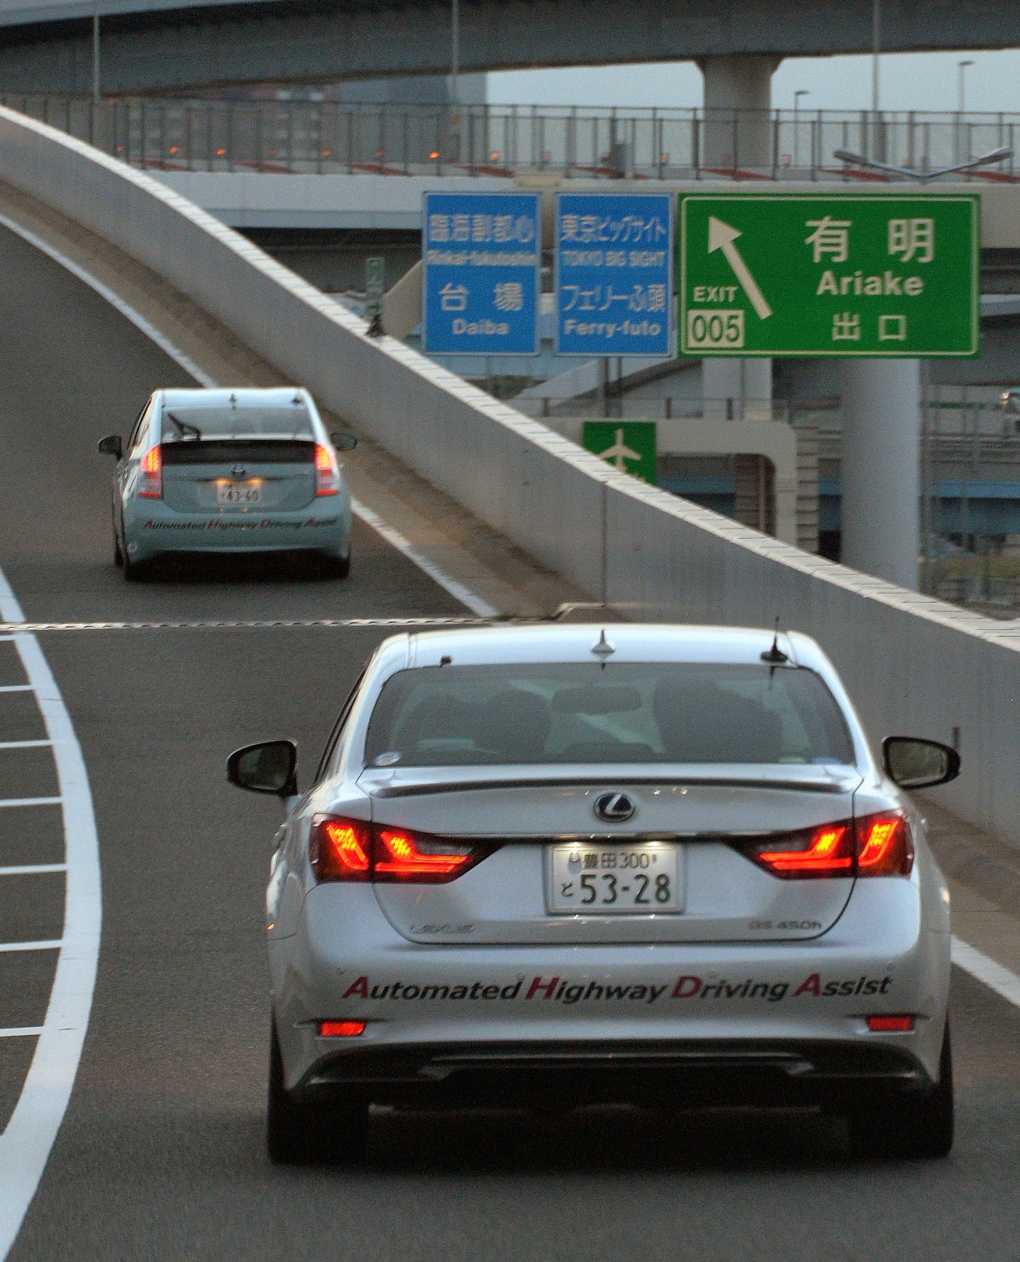 Toyota Automated Highway Driving Assist